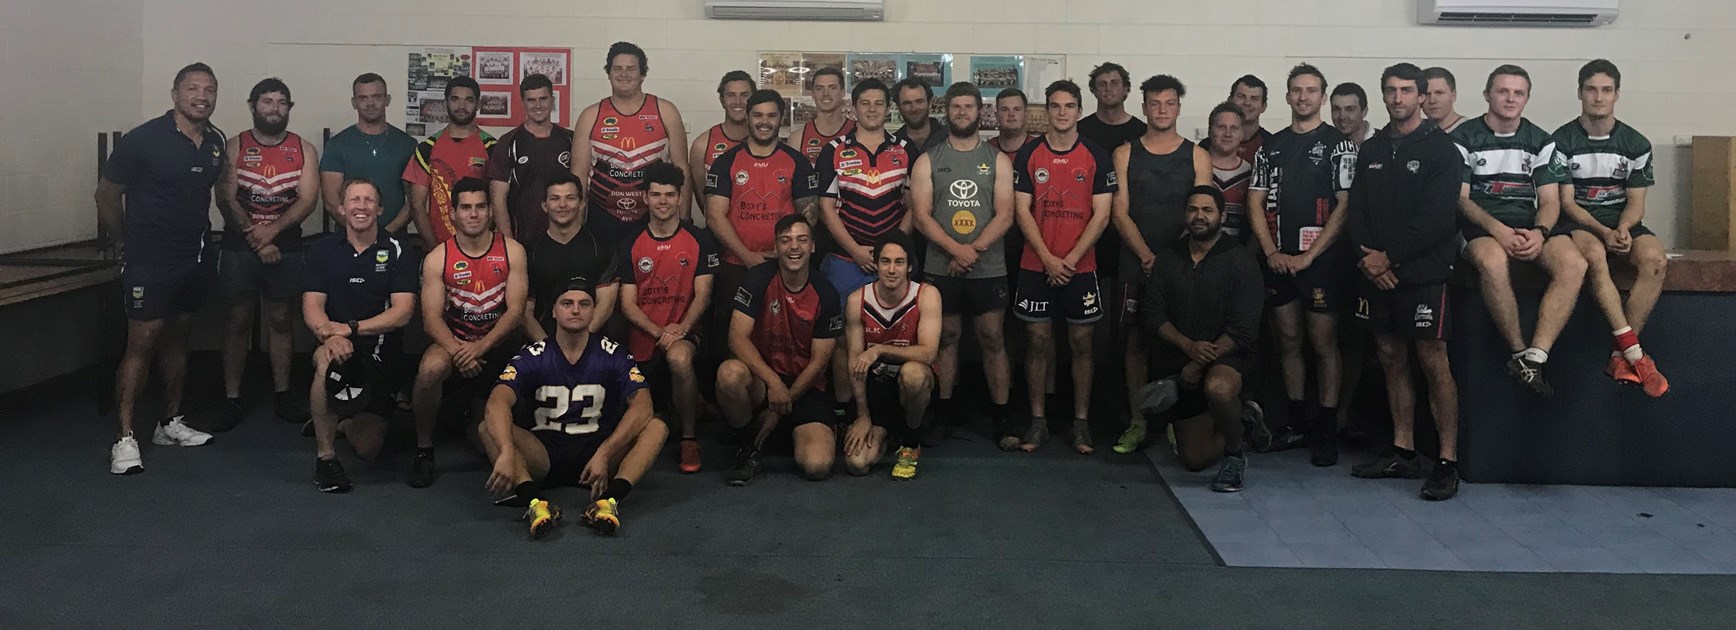 Embracing rugby league to make a difference